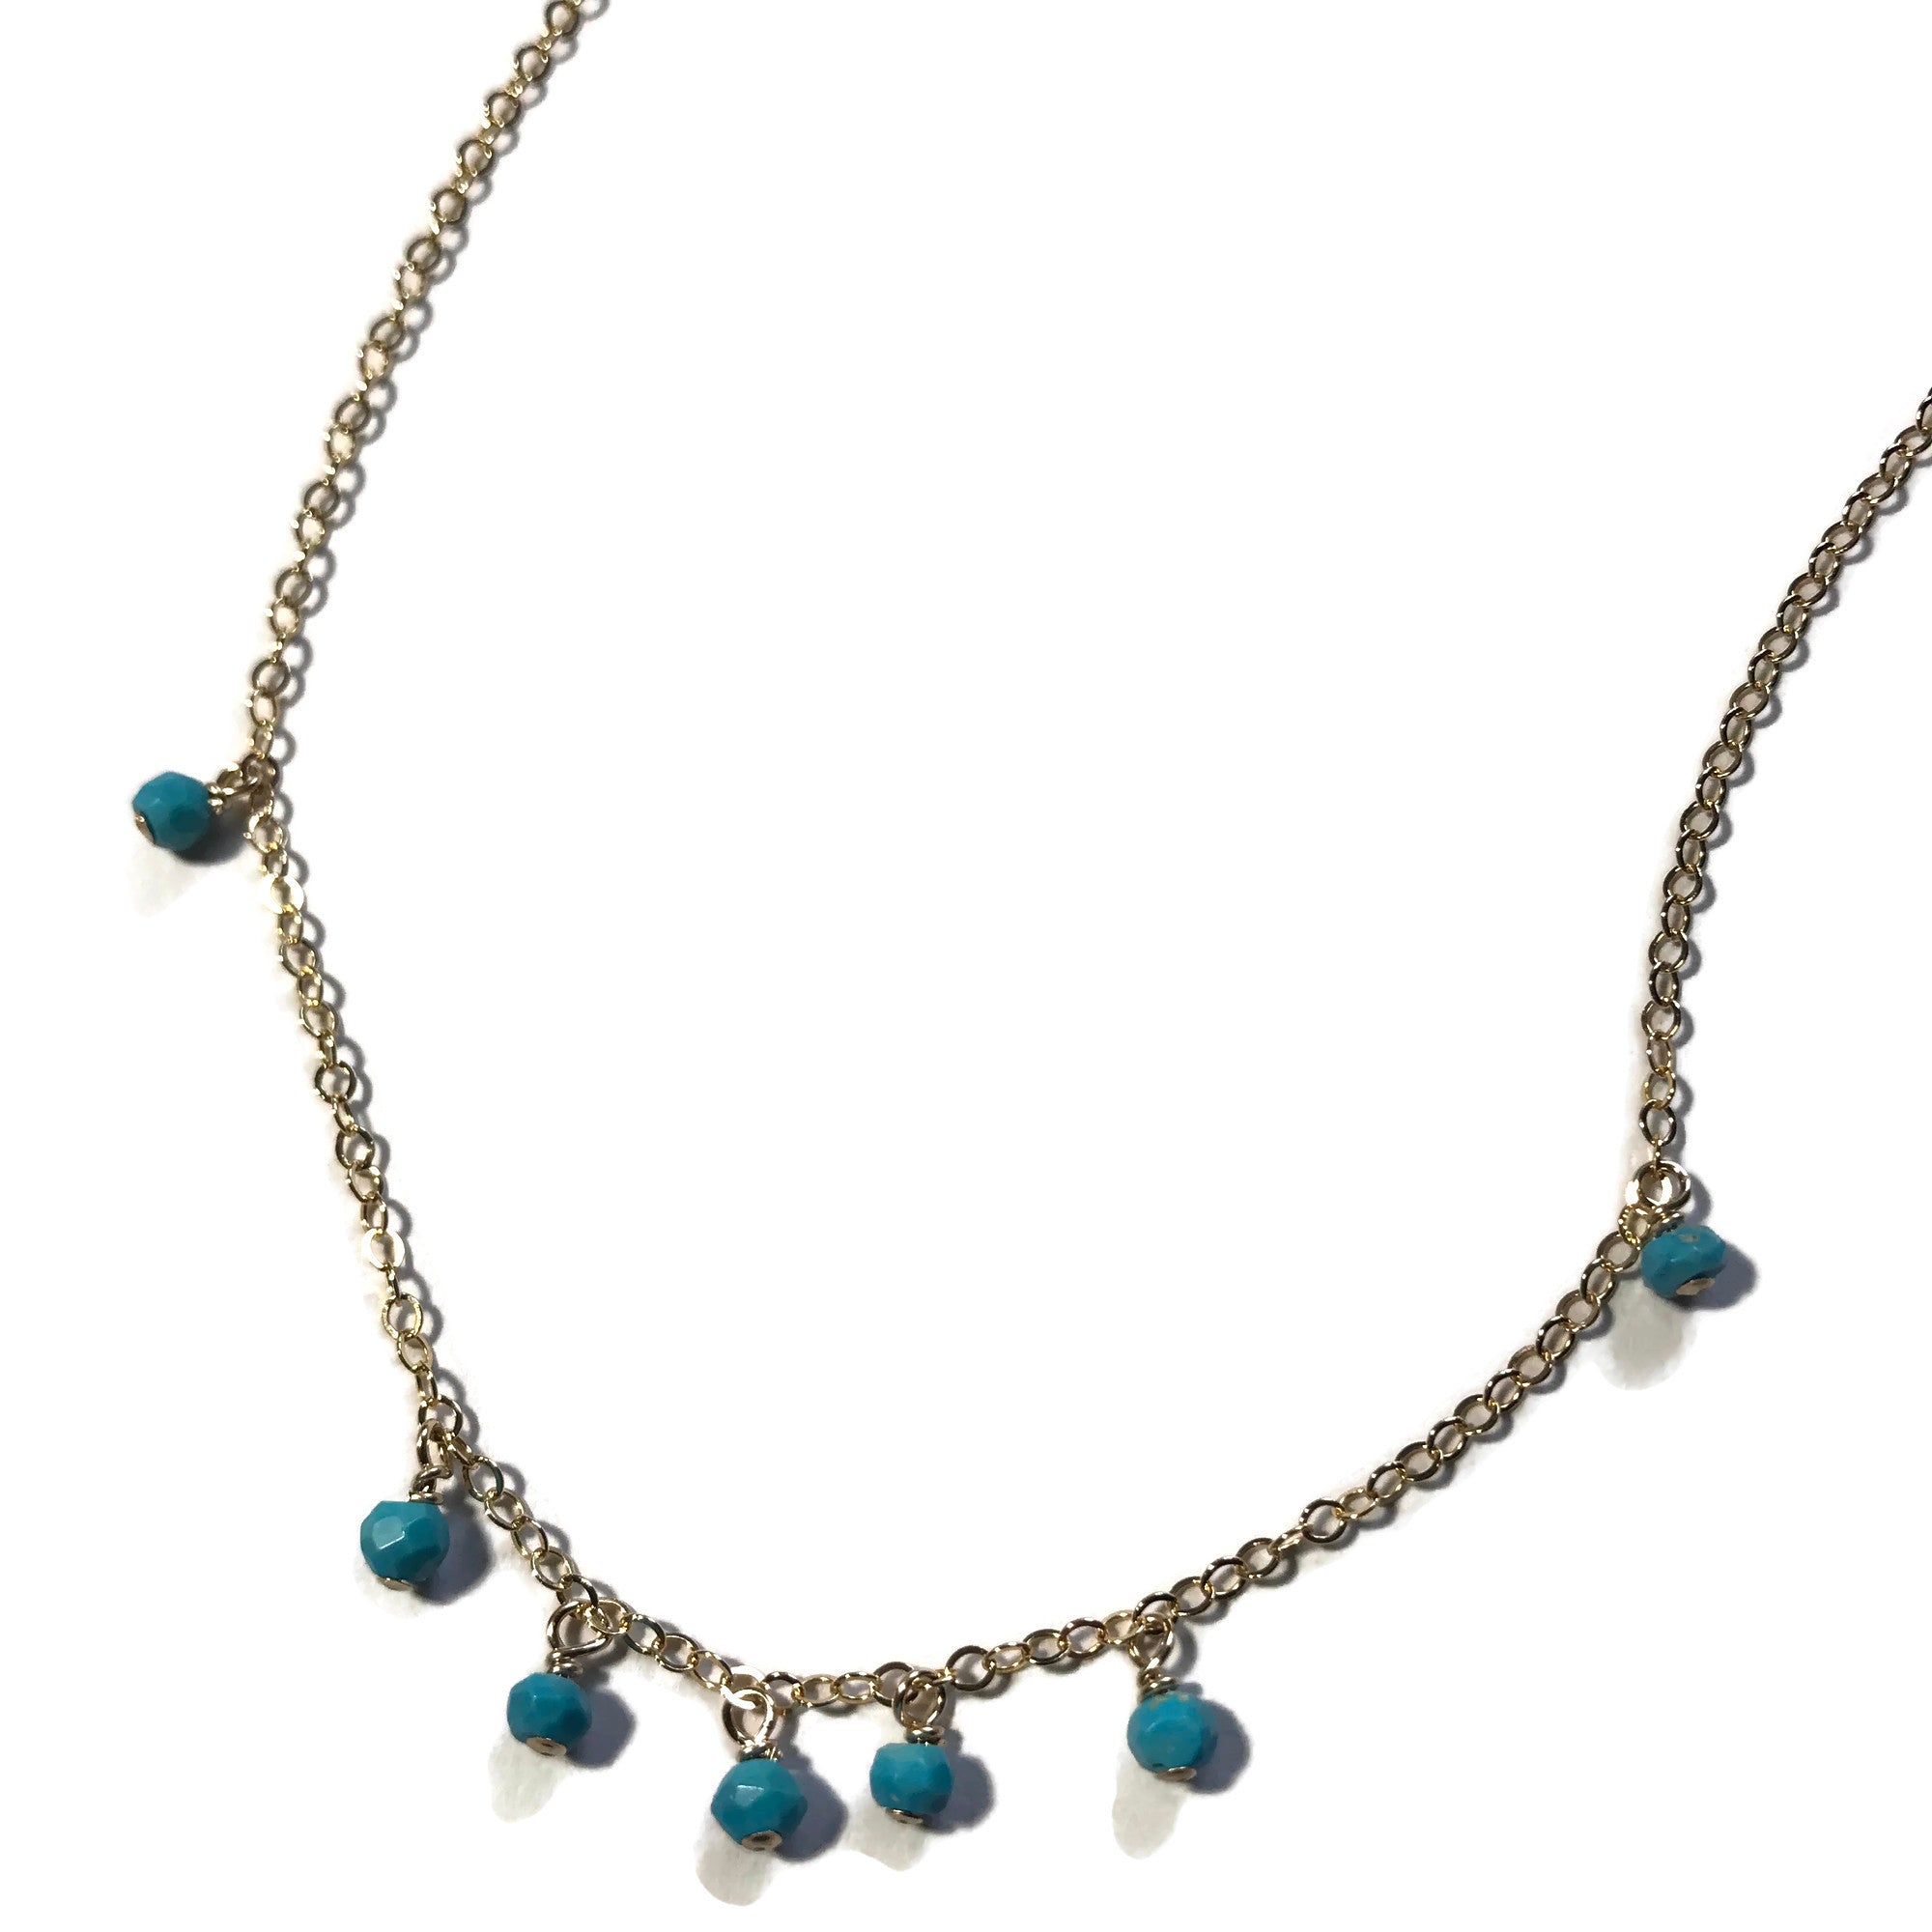 gold-filled delicate necklace with tiny turquoise beads